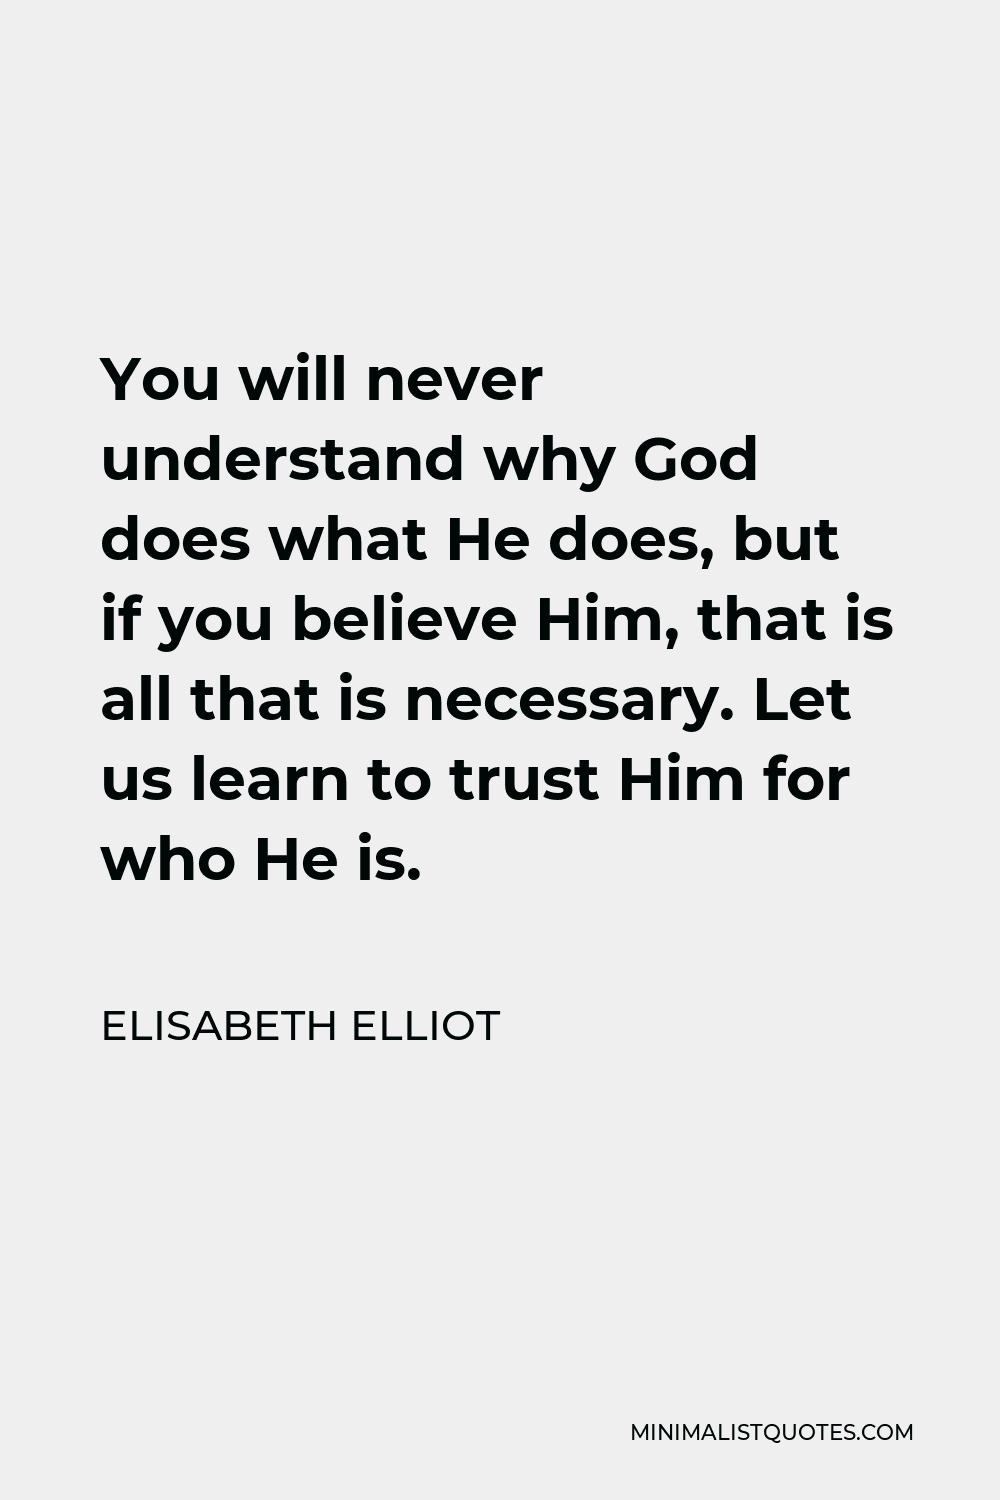 Elisabeth Elliot Quote - You will never understand why God does what He does, but if you believe Him, that is all that is necessary. Let us learn to trust Him for who He is.